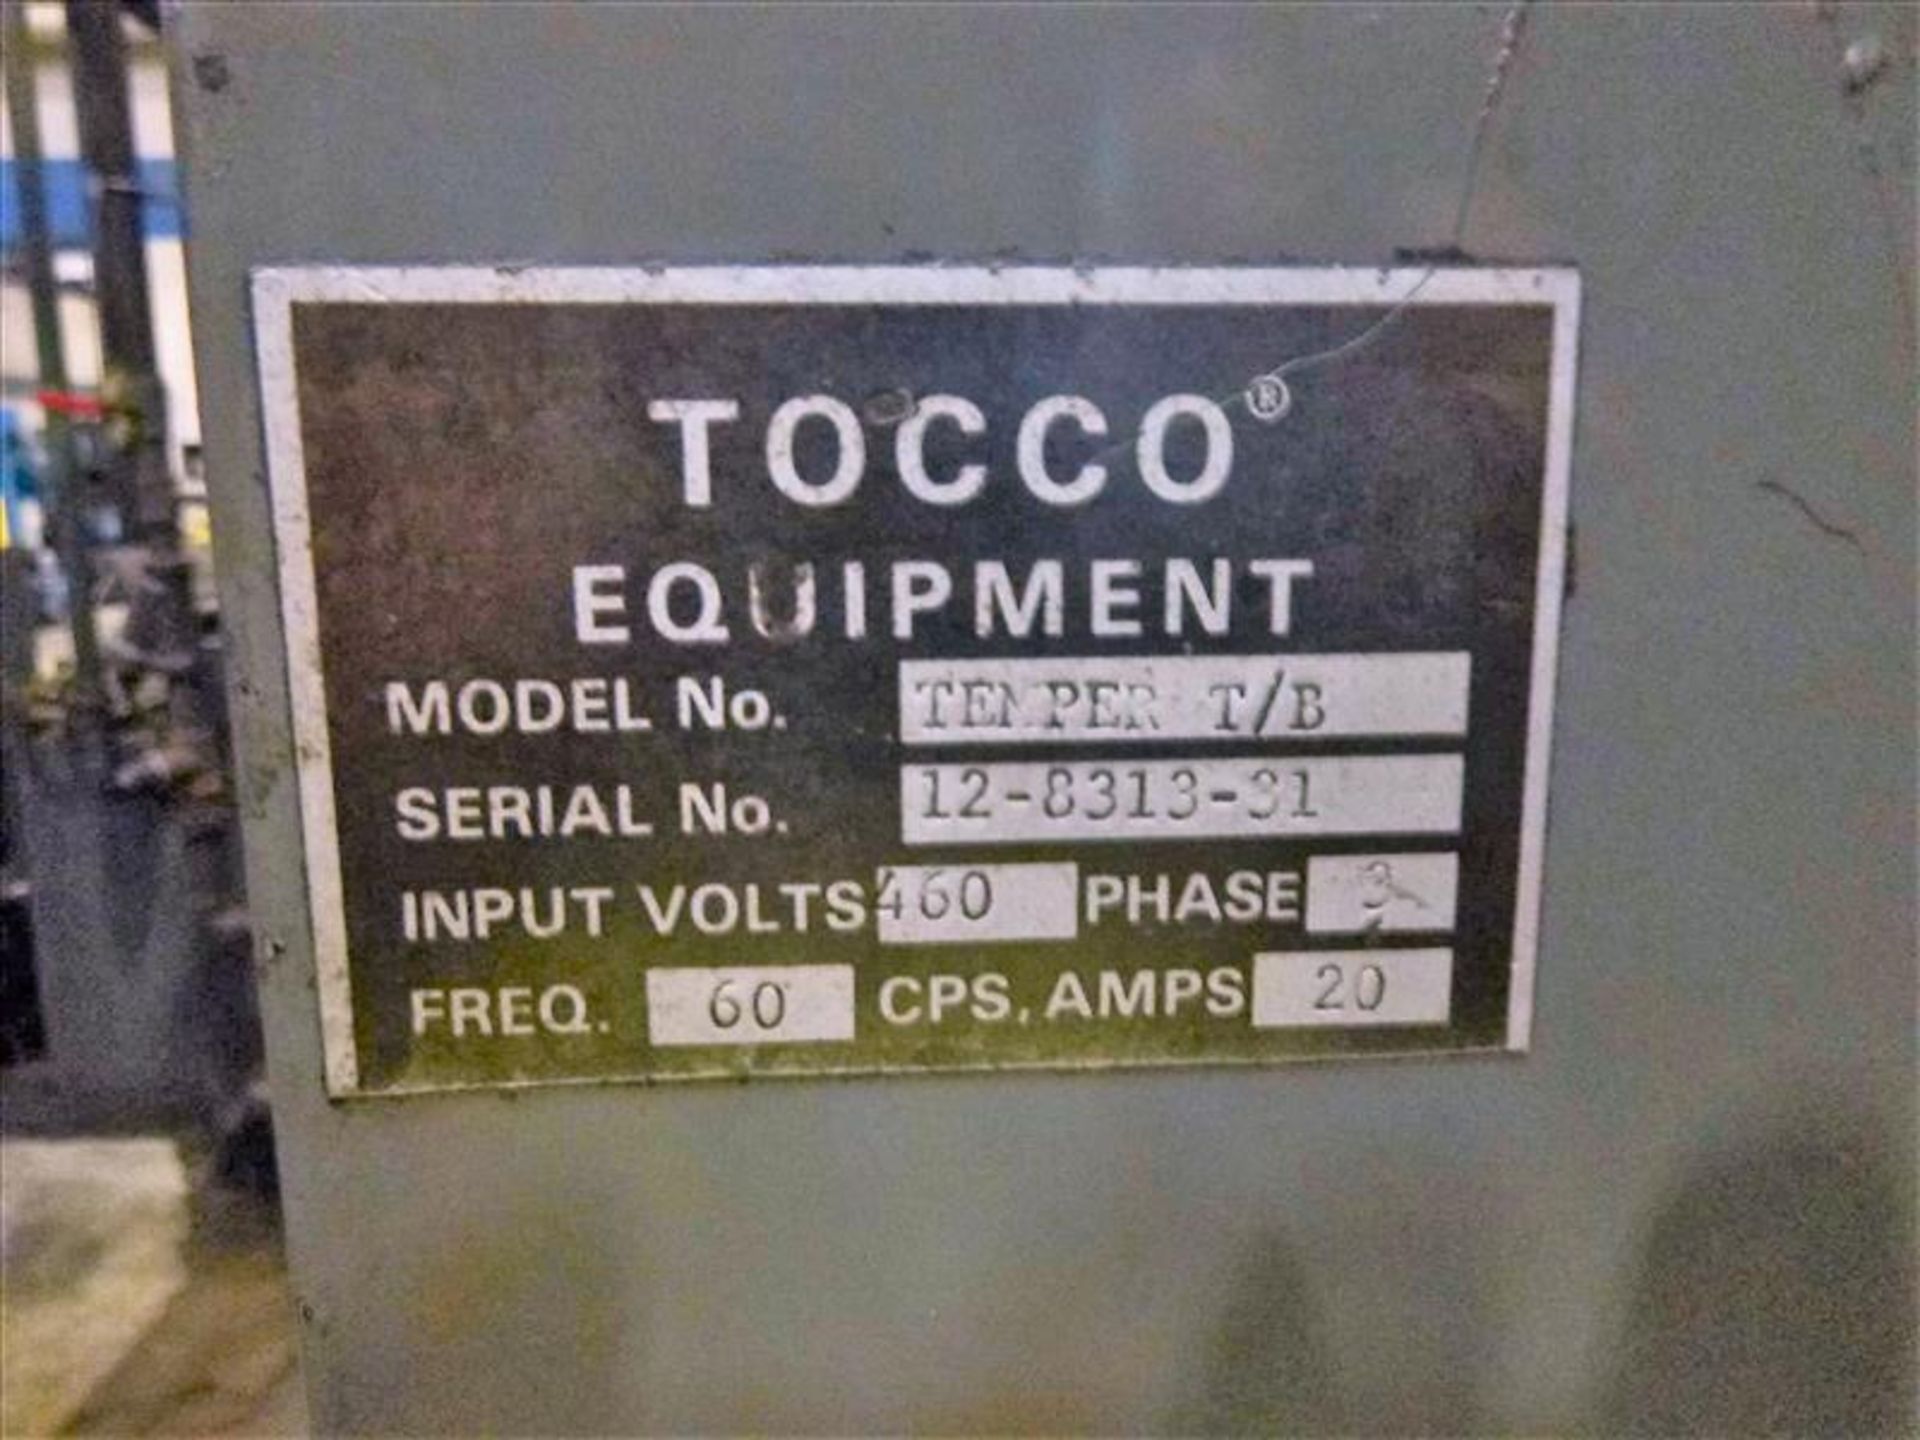 TOCCO Hardener Unit w/ TOCCOTRON 5EA 150 kw RF Generator, s/n 12-8313-16 c/w Distilled Water, - Image 16 of 23